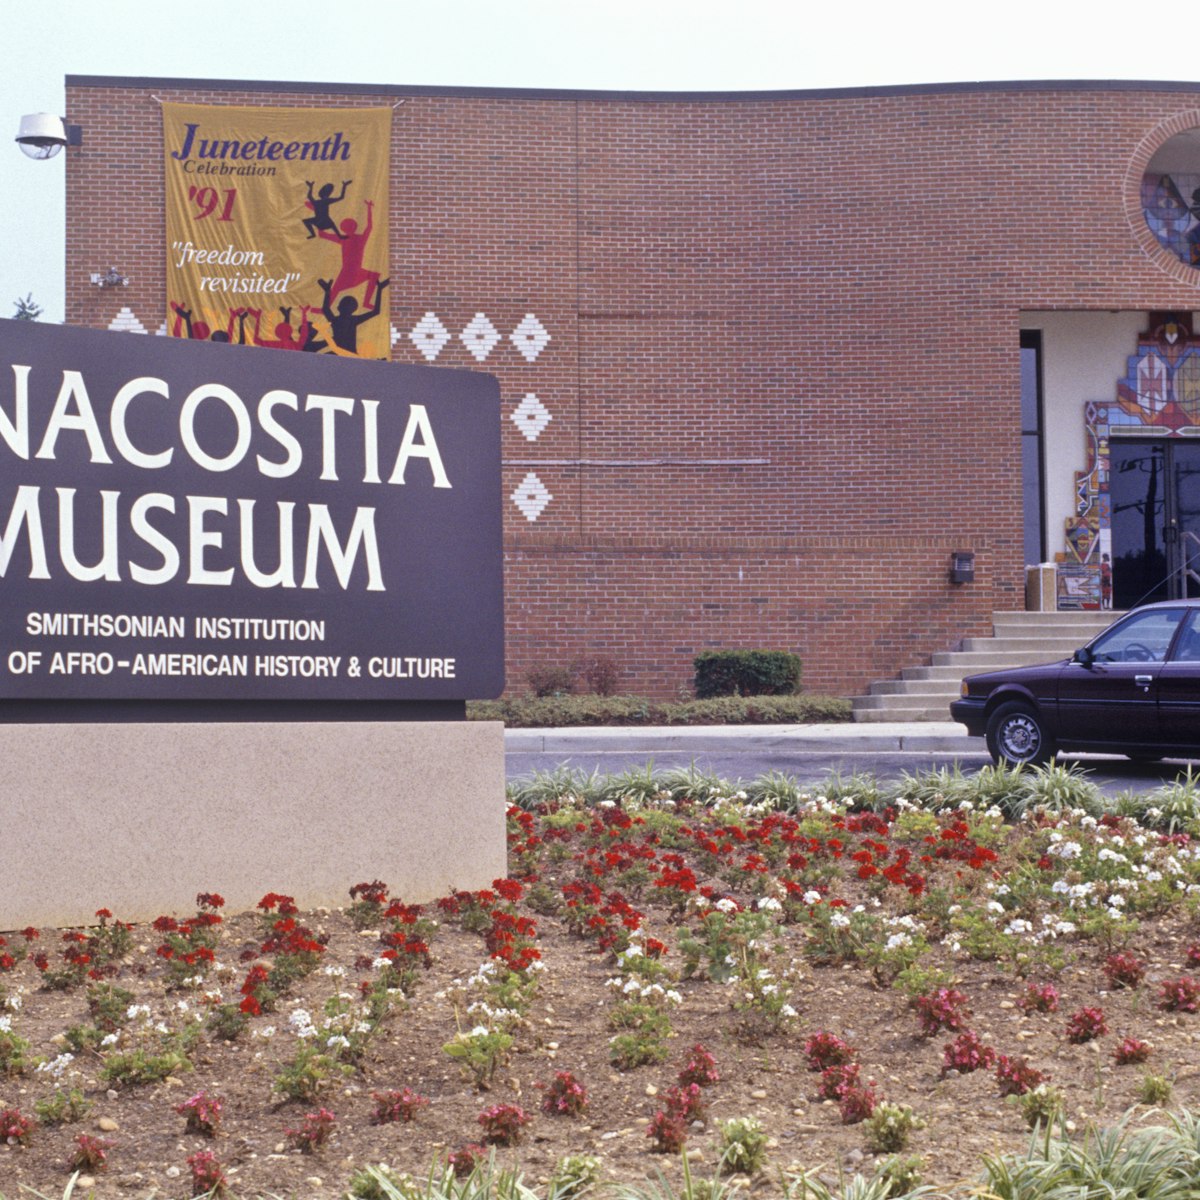 Anacostia Museum, museum of Afro-American history and culture, Smithsonian Institution, Washington, DC; Shutterstock ID 257274409; Your name (First / Last): Josh Vogel; Project no. or GL code: 56530; Network activity no. or Cost Centre: Online-Design; Product or Project: 65050/7529/Josh Vogel/LP.com Destination Galleries